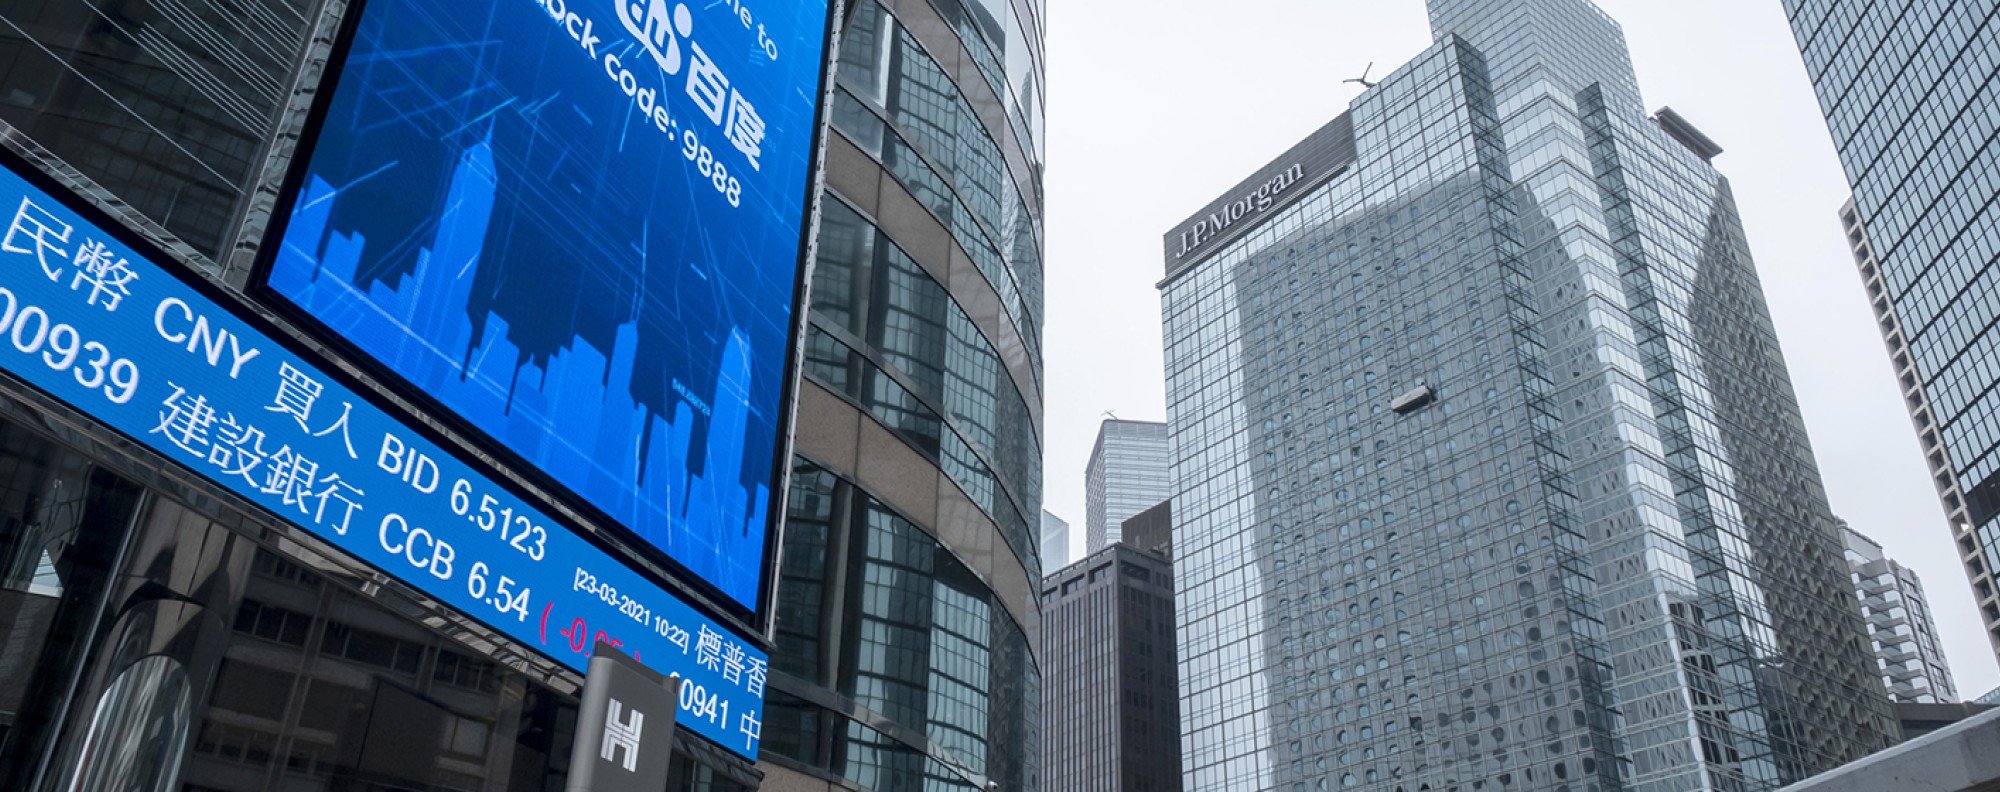 A screen shows a message marking the listing of Baidu on the Hong Kong Stocks Exchange outside the Exchange Square complex. Photo: Bloomberg